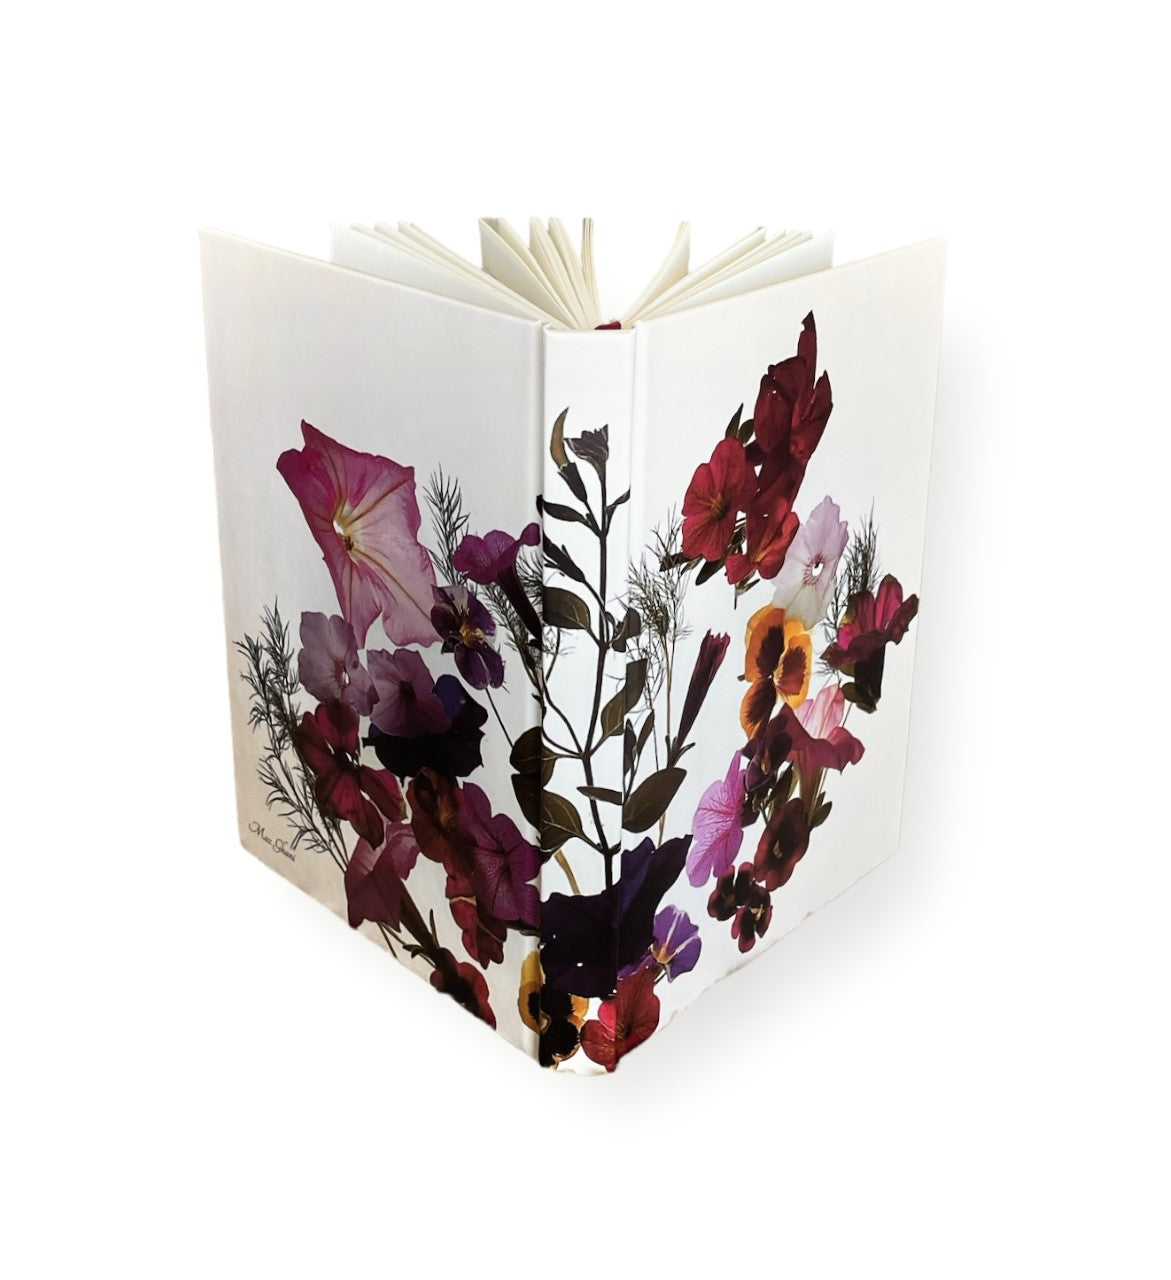 floralis, maz ghani, wildflowers, hardcover journal, journal, book, write, luxury gifts, gifts, shop, colorful, flowers, botanical